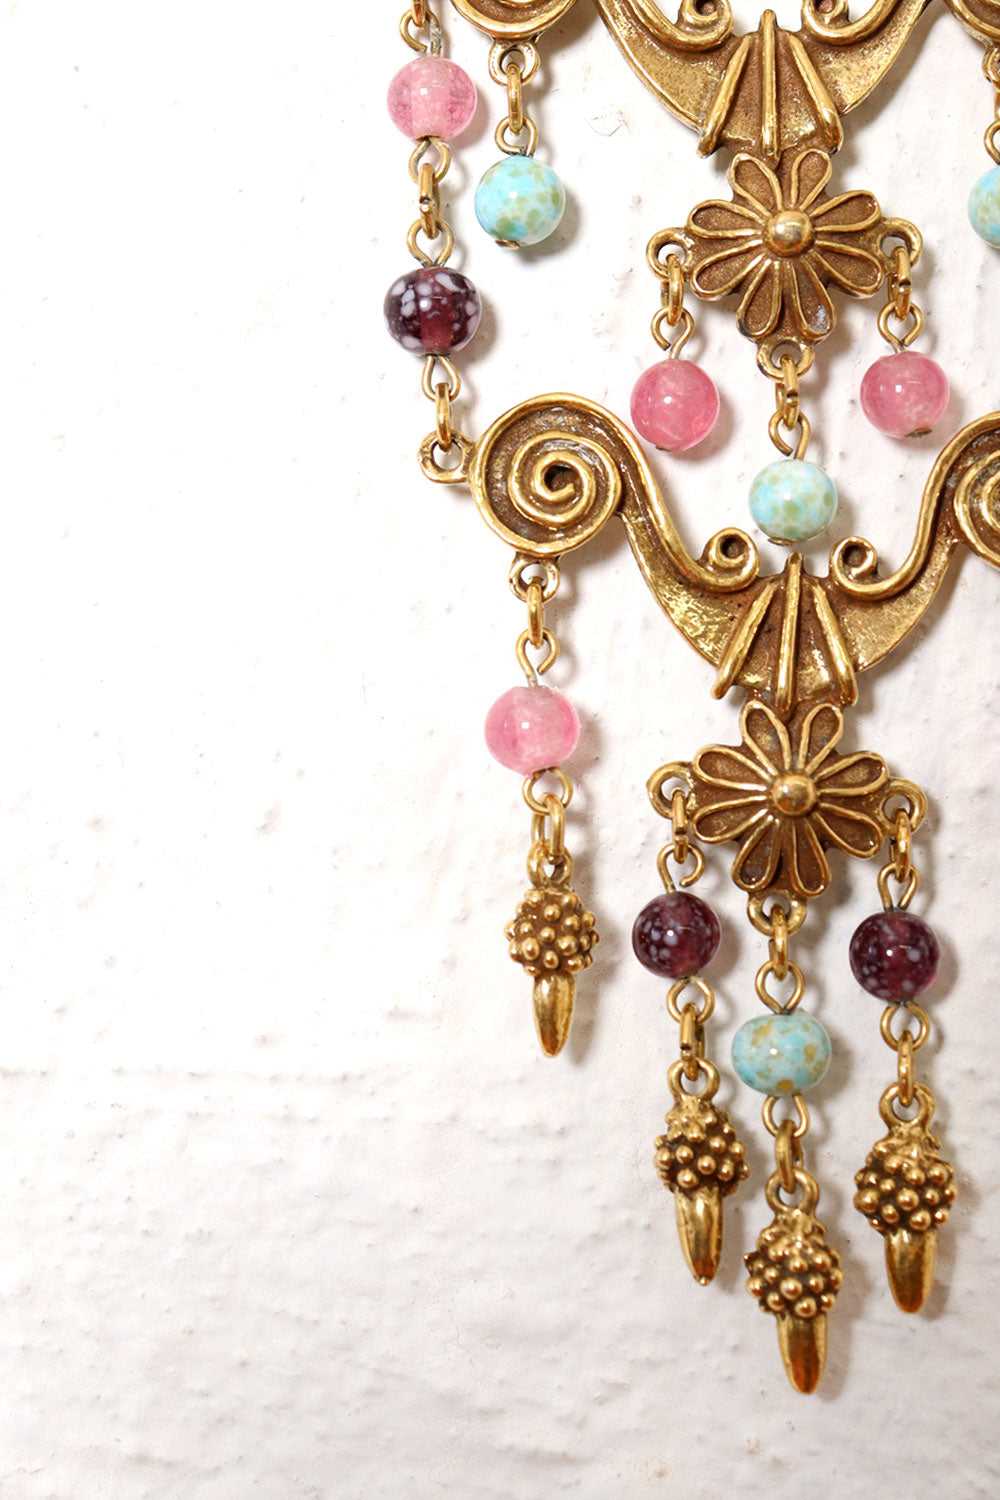 Glass Bead Gilded Statement Necklace - image 2